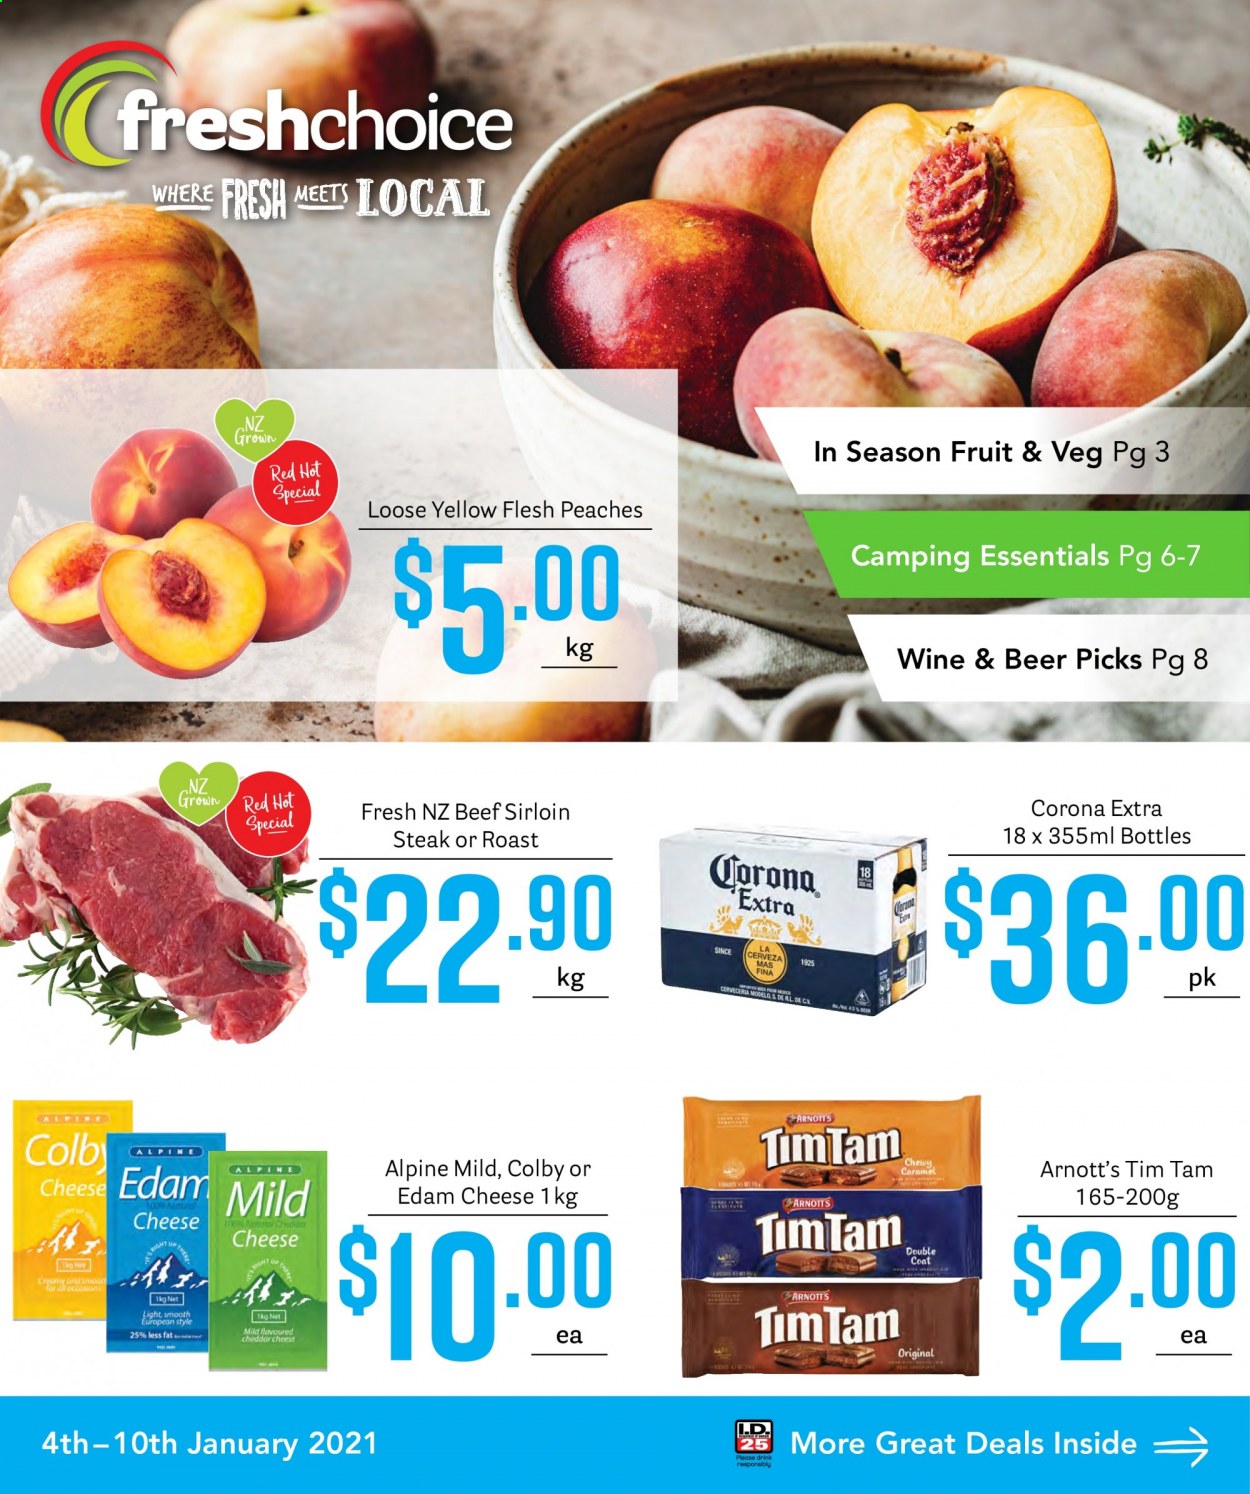 thumbnail - Fresh Choice mailer - 04.01.2021 - 10.01.2021 - Sales products - peaches, Colby cheese, edam cheese, cheddar, cheese, Tim Tam, caramel, wine, beer, Corona Extra, Modelo, beef sirloin, steak. Page 1.